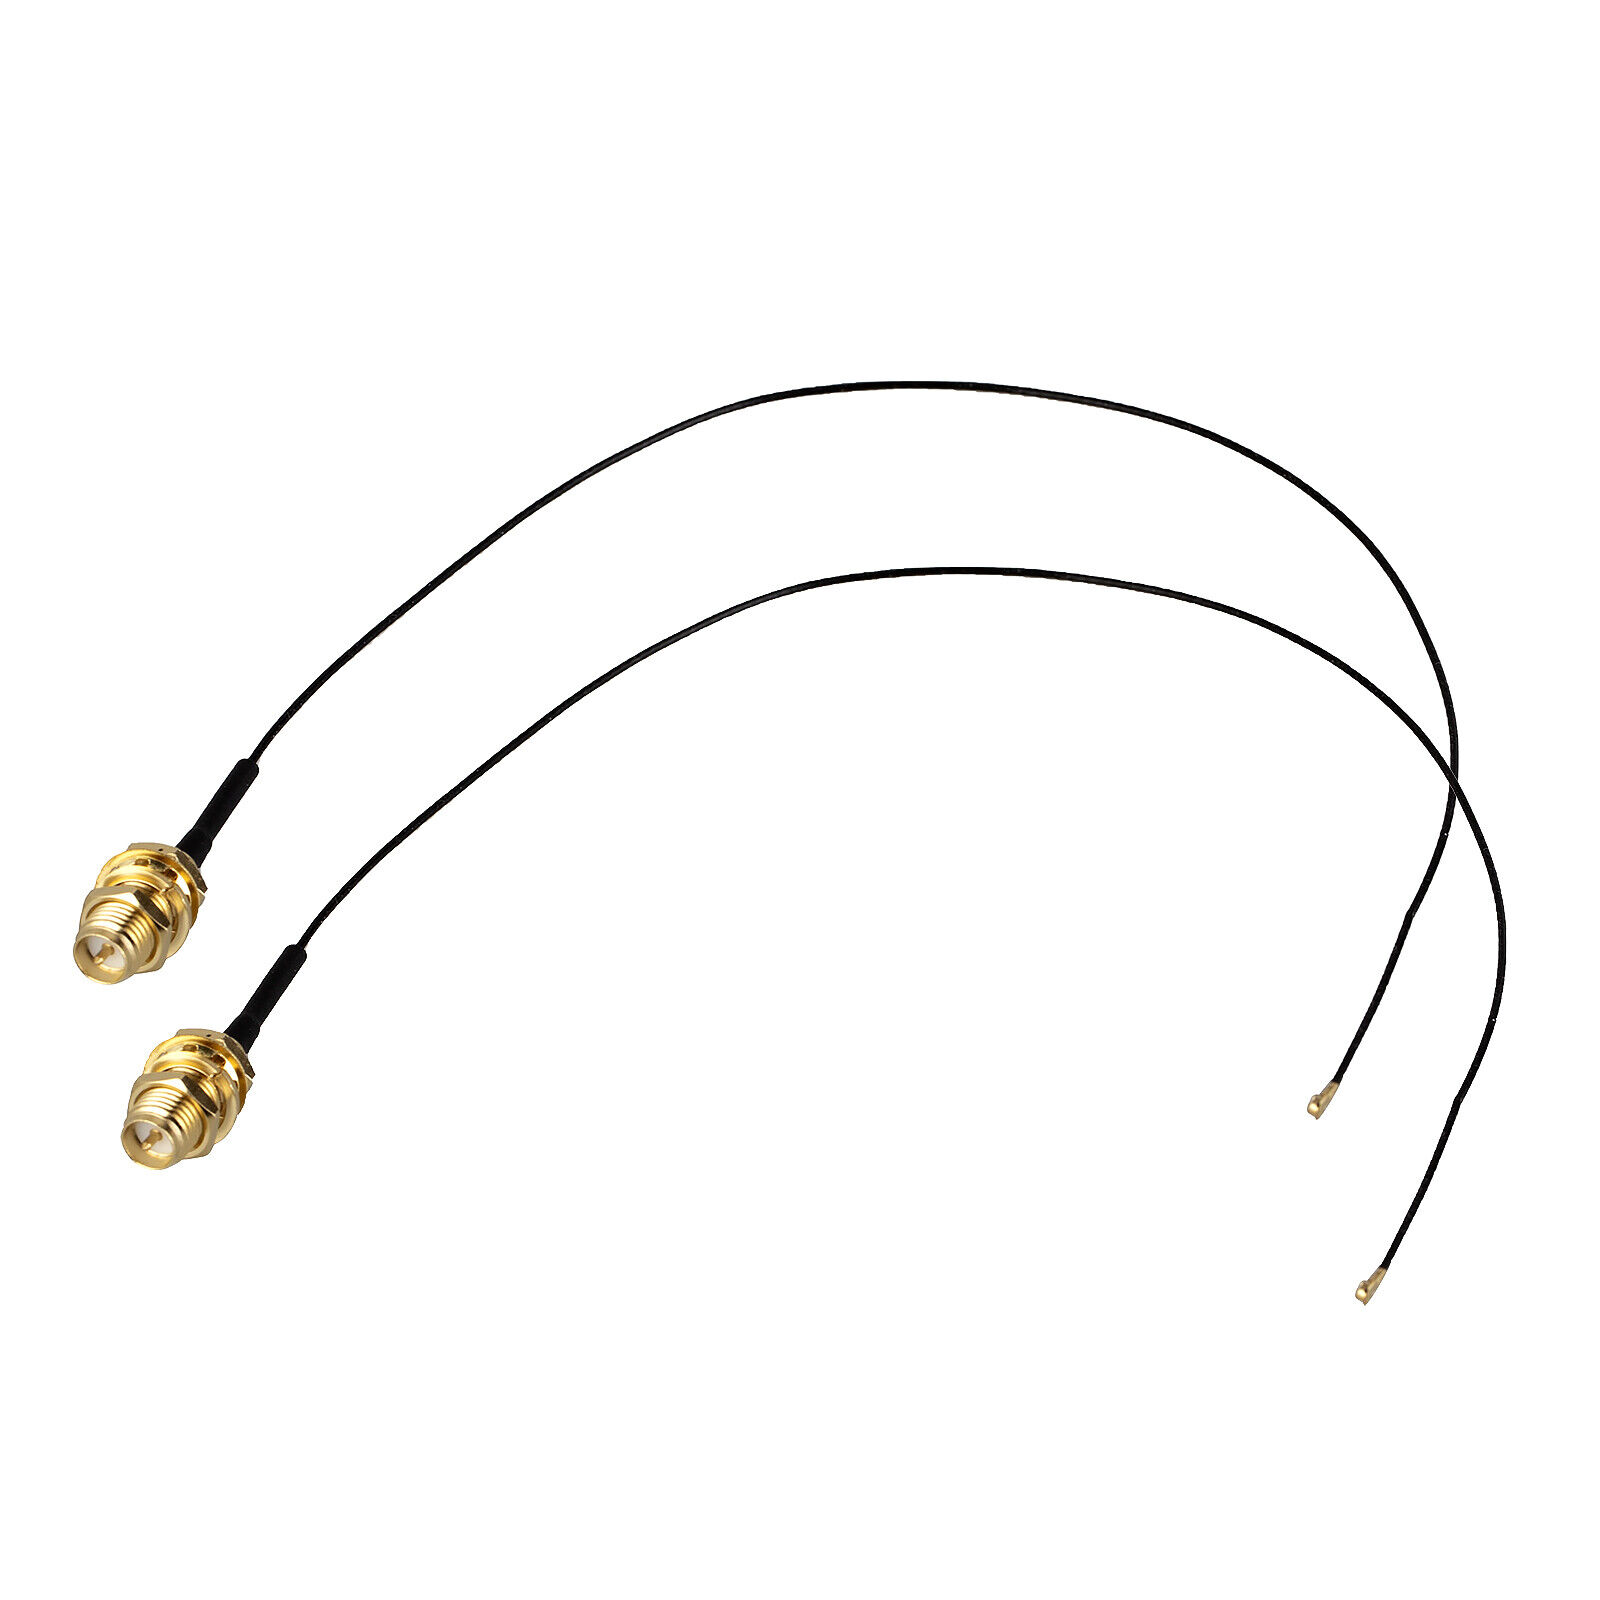 IPEX-4 M.2 to RP-SMA 50cm Extension Cable for NGFF WFi BT Card Antenna Pigtail